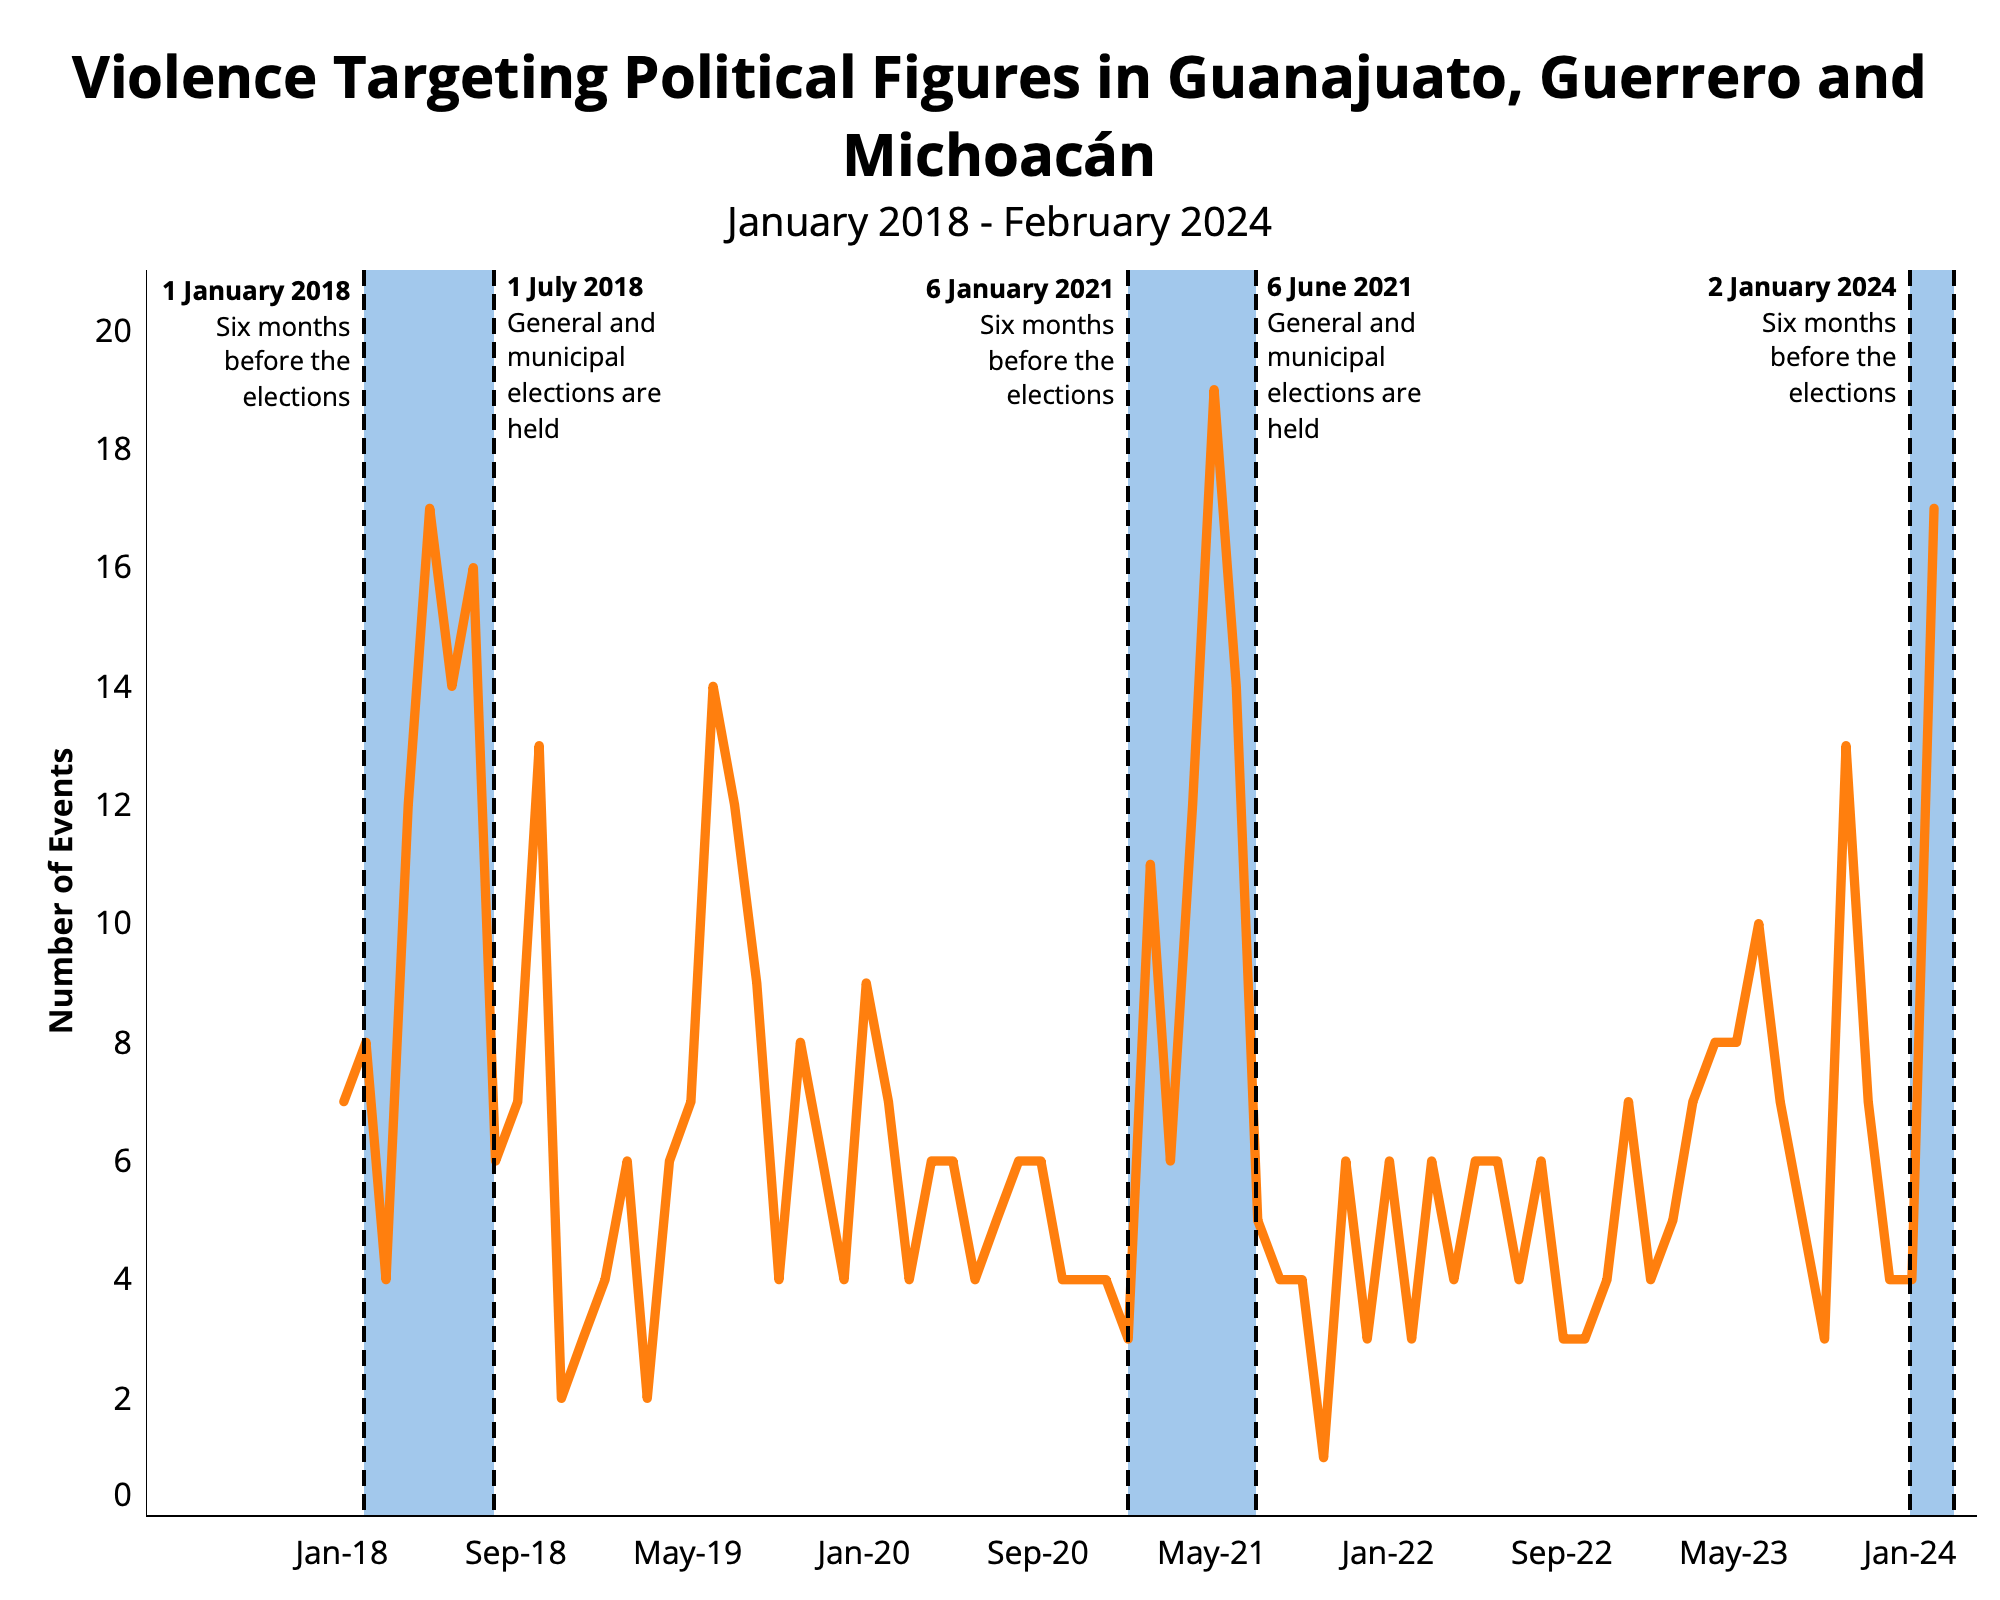 Violence targeting political figures in Guanajuato, Guerrero and Michoacan